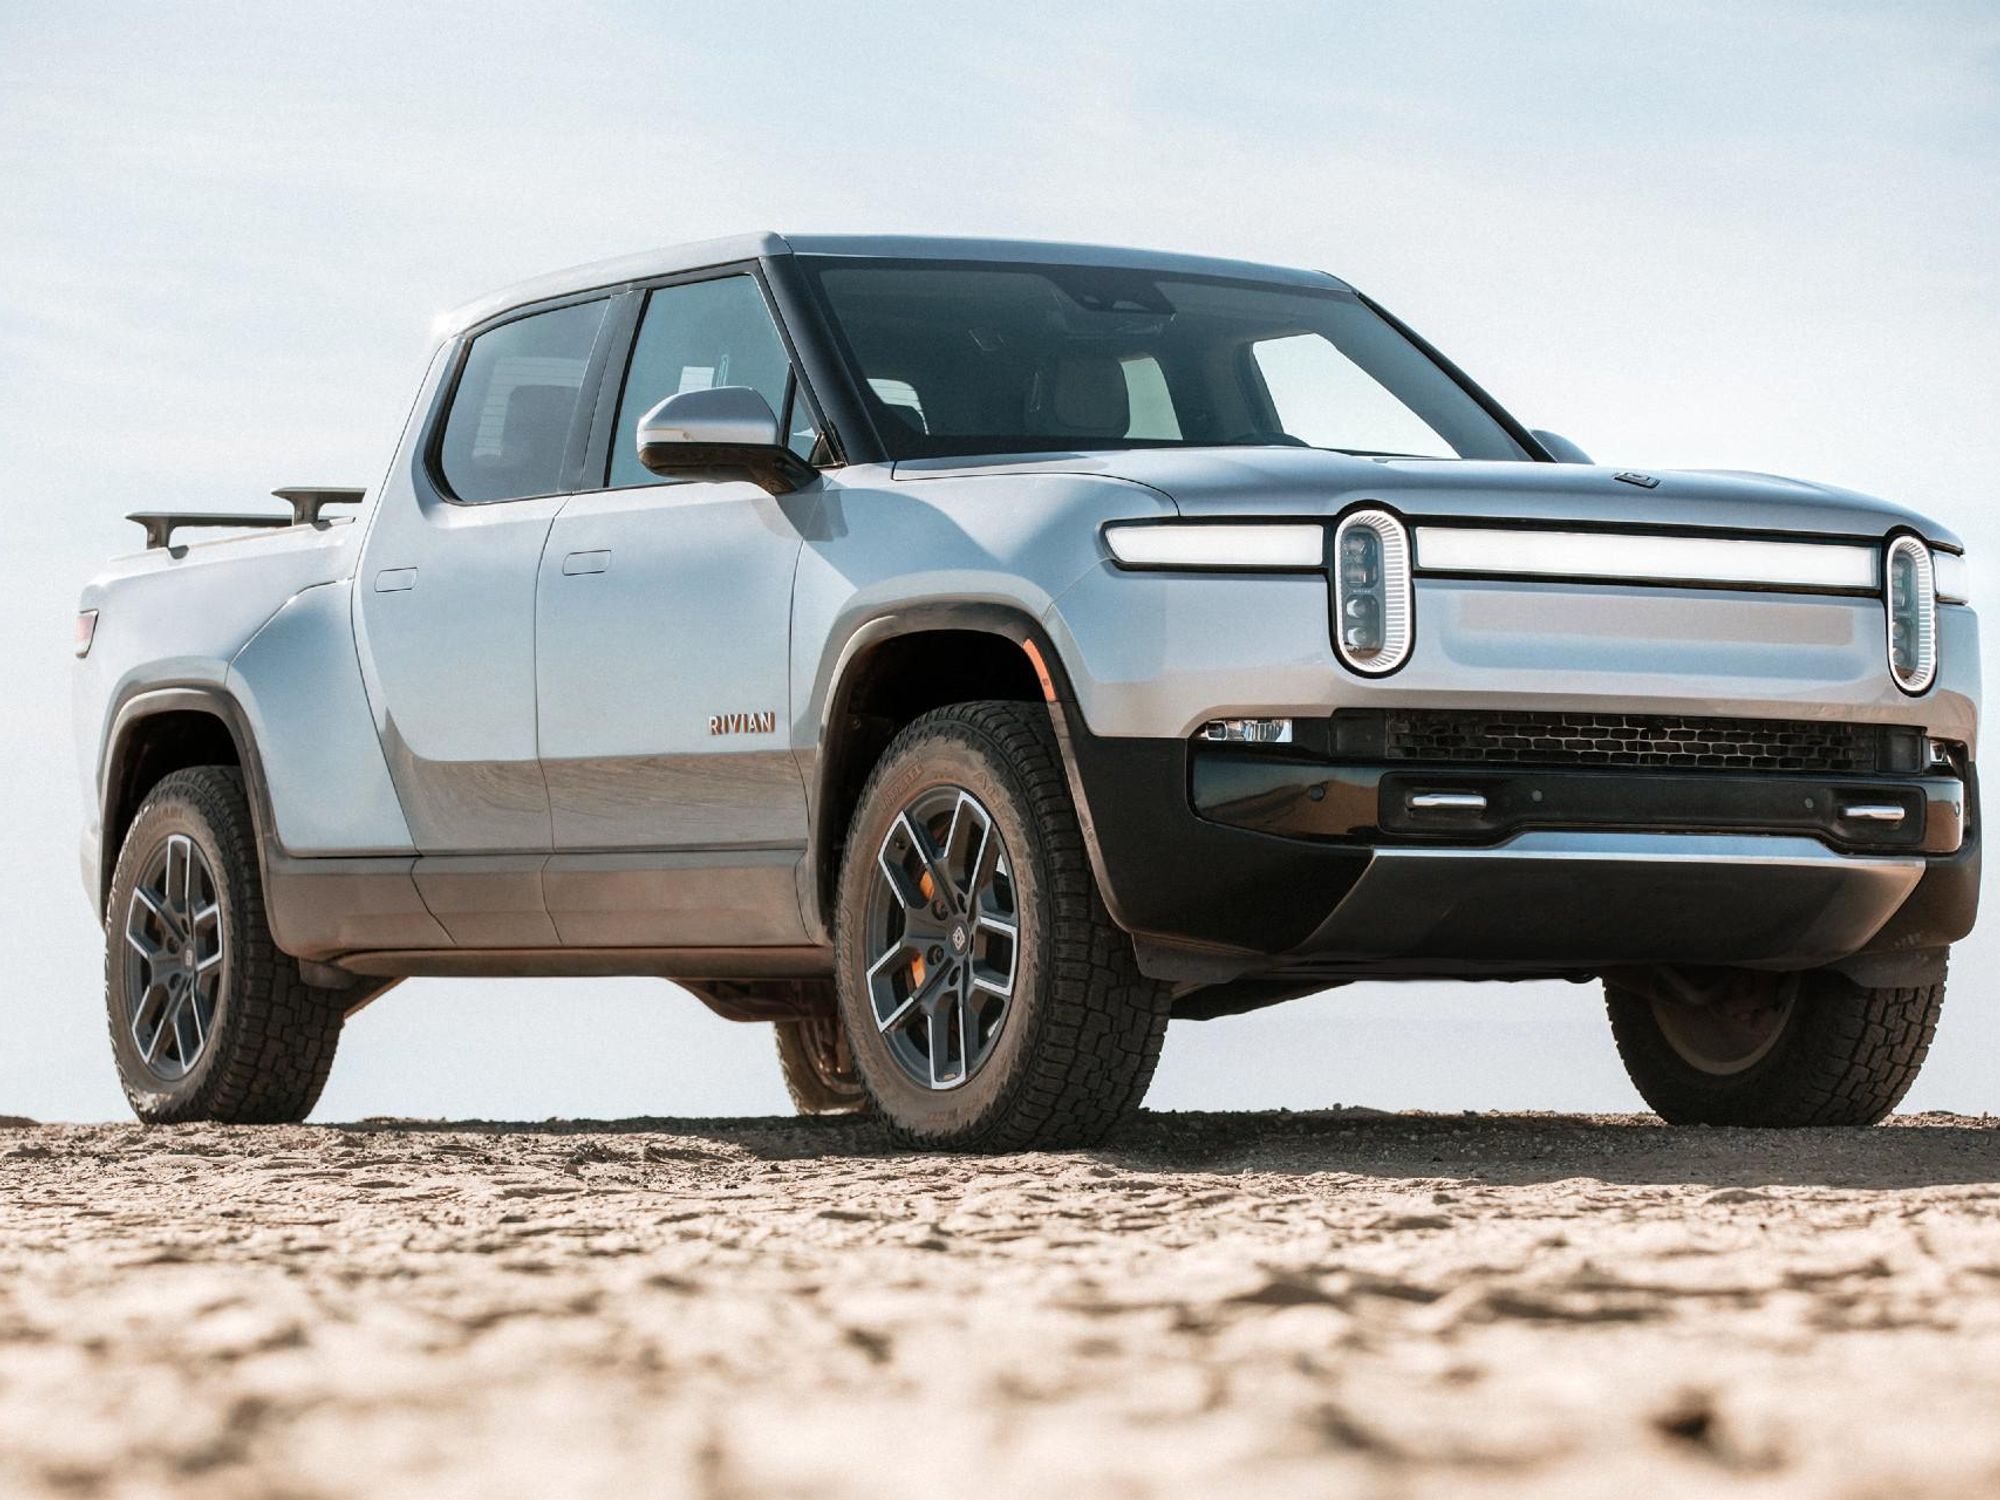 Frustrated Customer Experiences Strange Situation with Rivian Delivery, Seeks Help